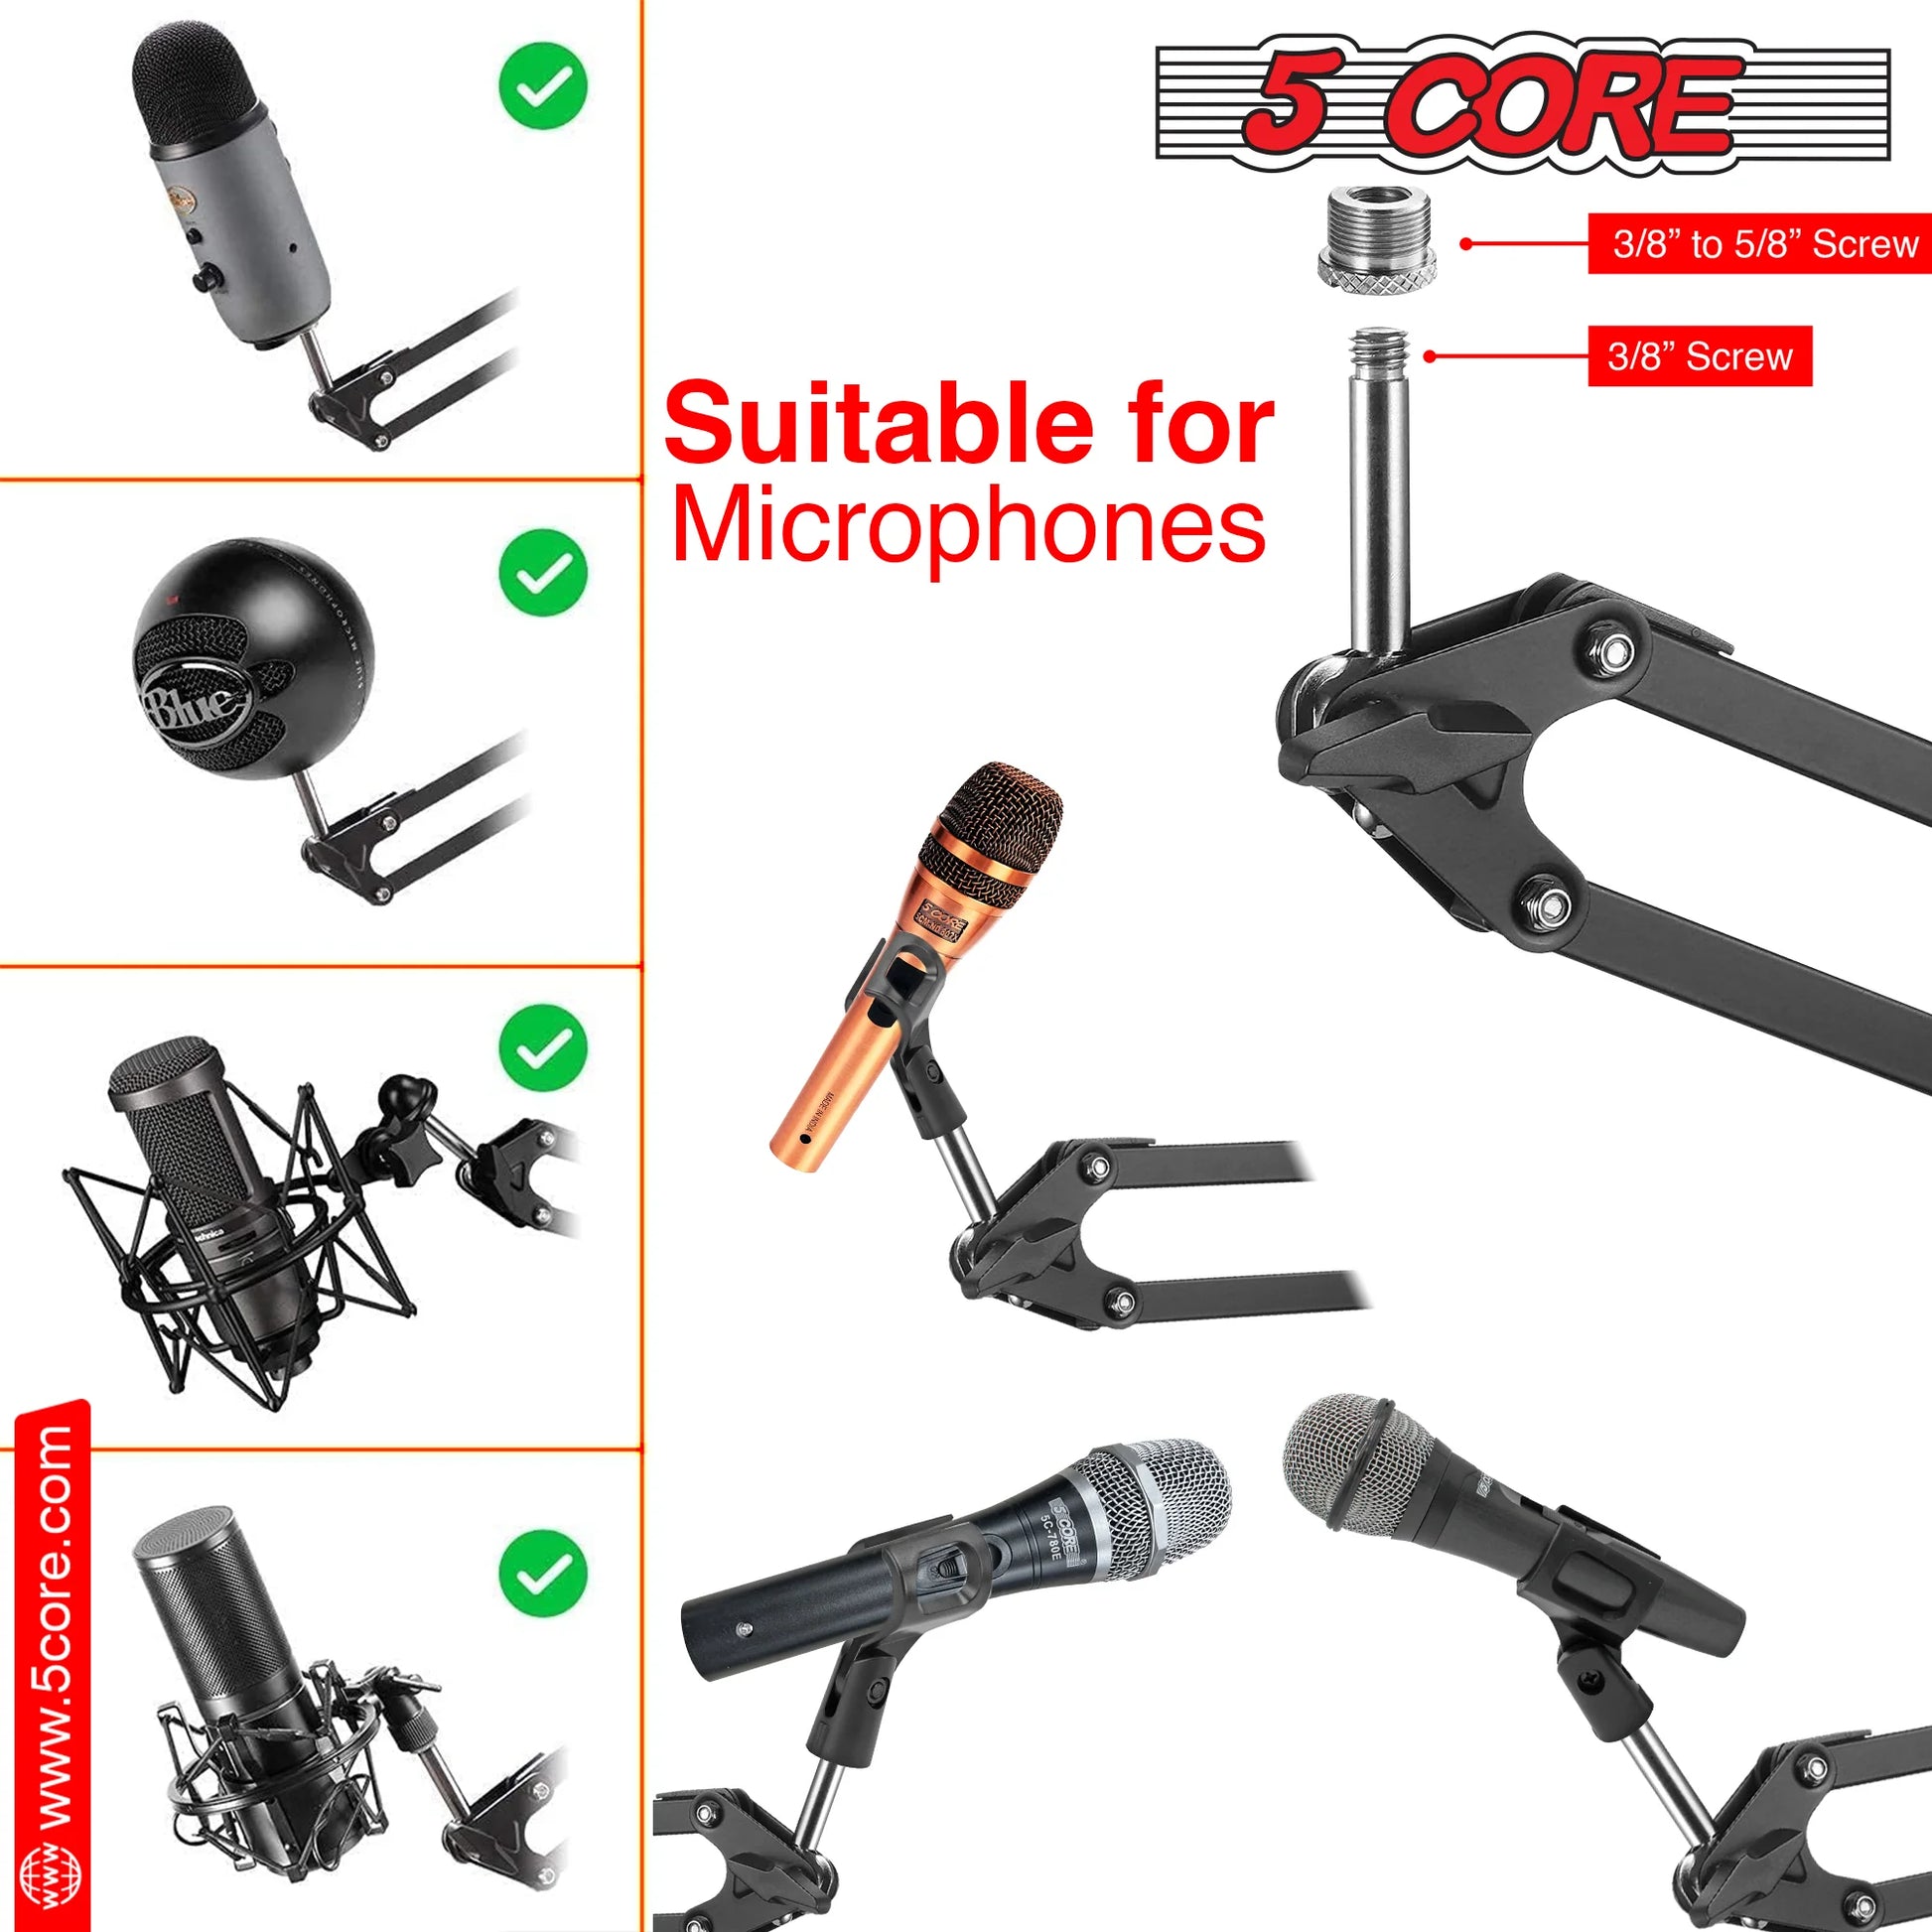 Enhance Your Recording Setup with the 5 Core Adjustable Suspension Boom Arm Mic Stand Set - Includes Shock Mount, Dual Pop Filter, and Cable Ties for Ultimate Convenience